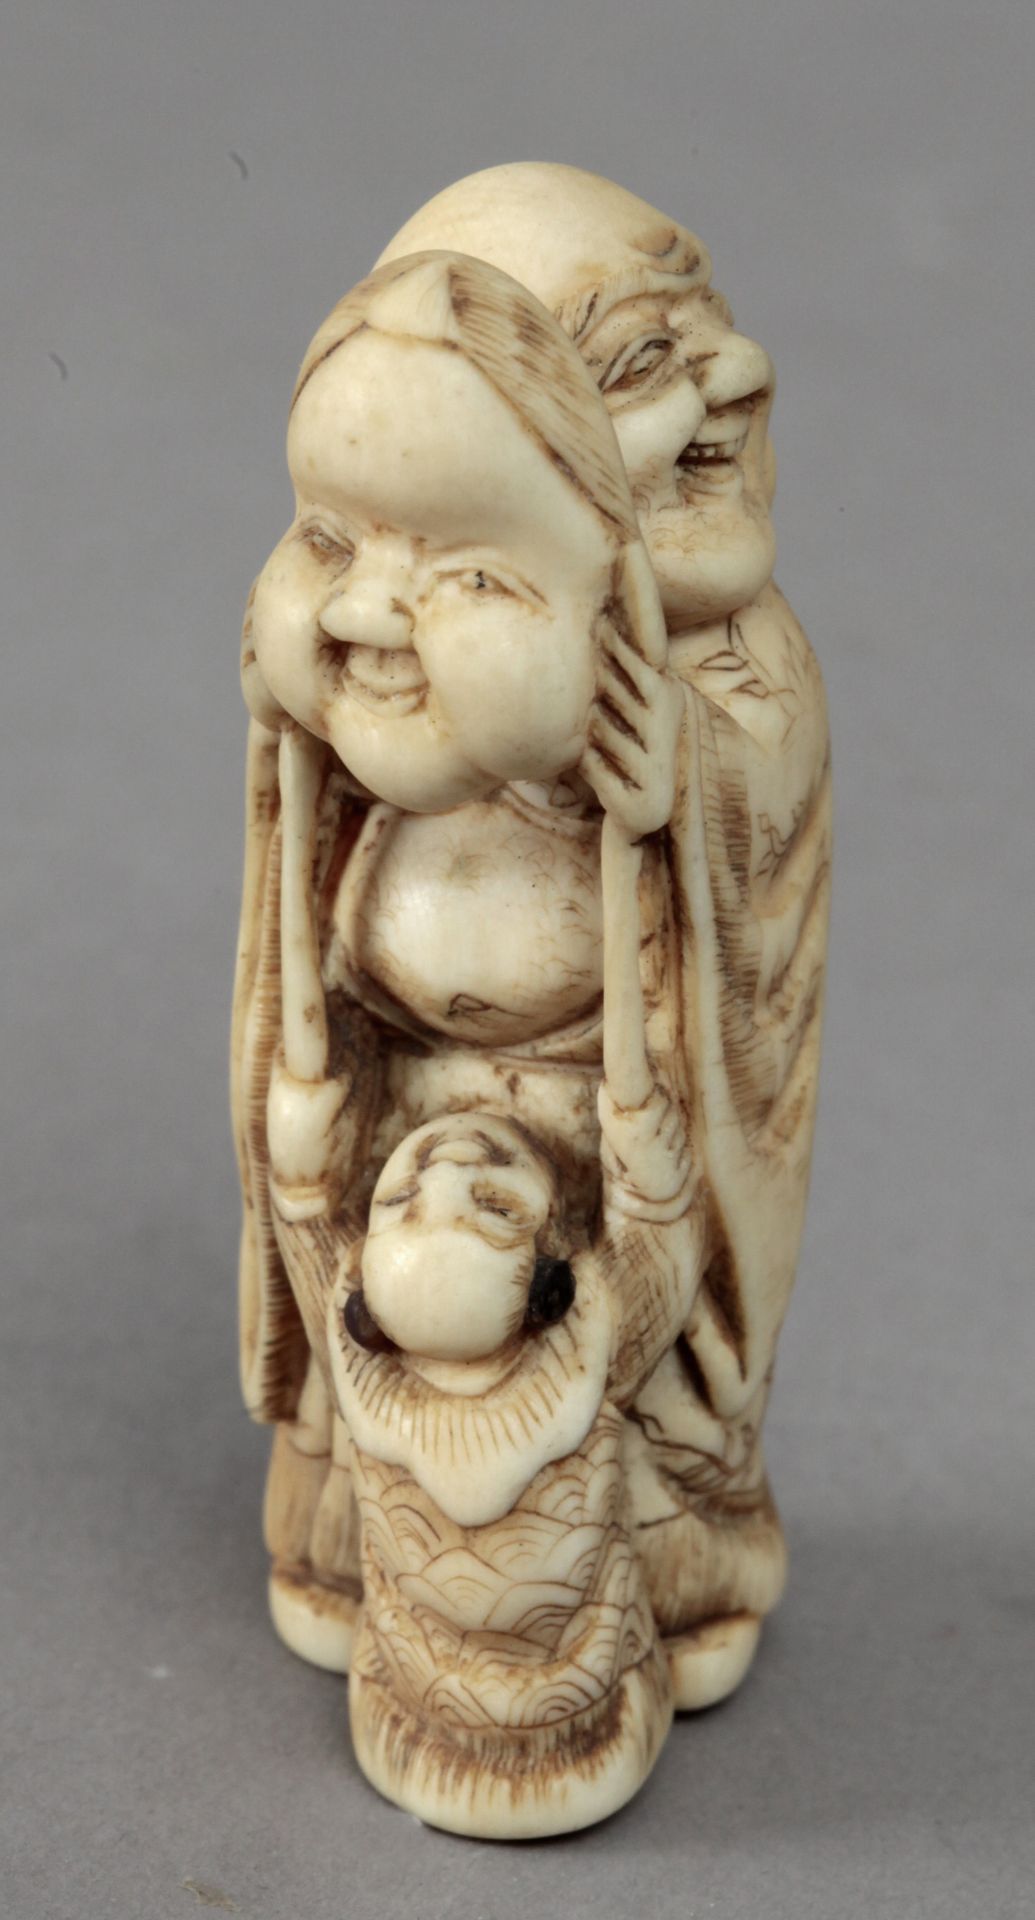 Early 19th century Japanese school. A carved ivory netsuke depicting a Hotei